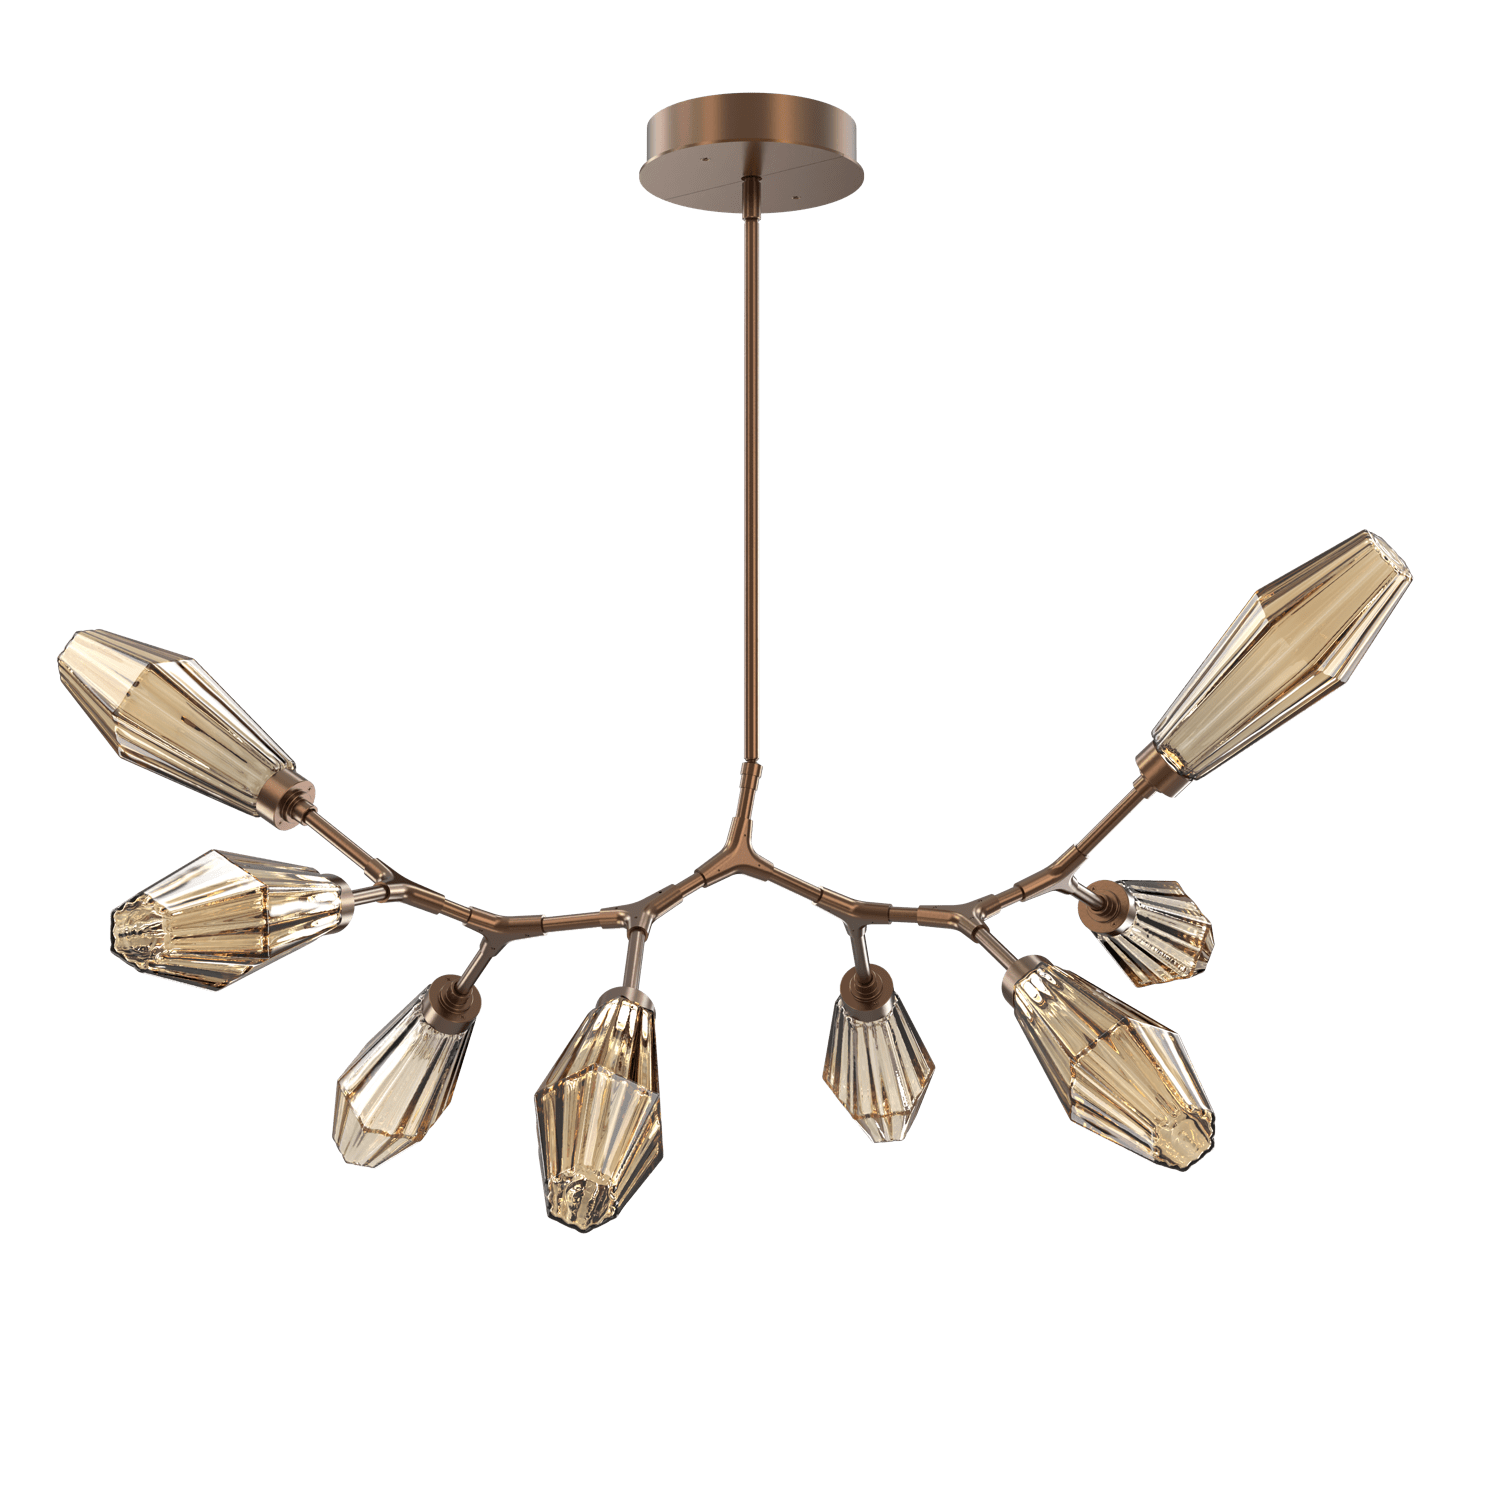 PLB0049-BB-BB-RB-Hammerton-Studio-Aalto-8-light-modern-branch-chandelier-with-burnished-bronze-finish-and-optic-ribbed-bronze-glass-shades-and-LED-lamping